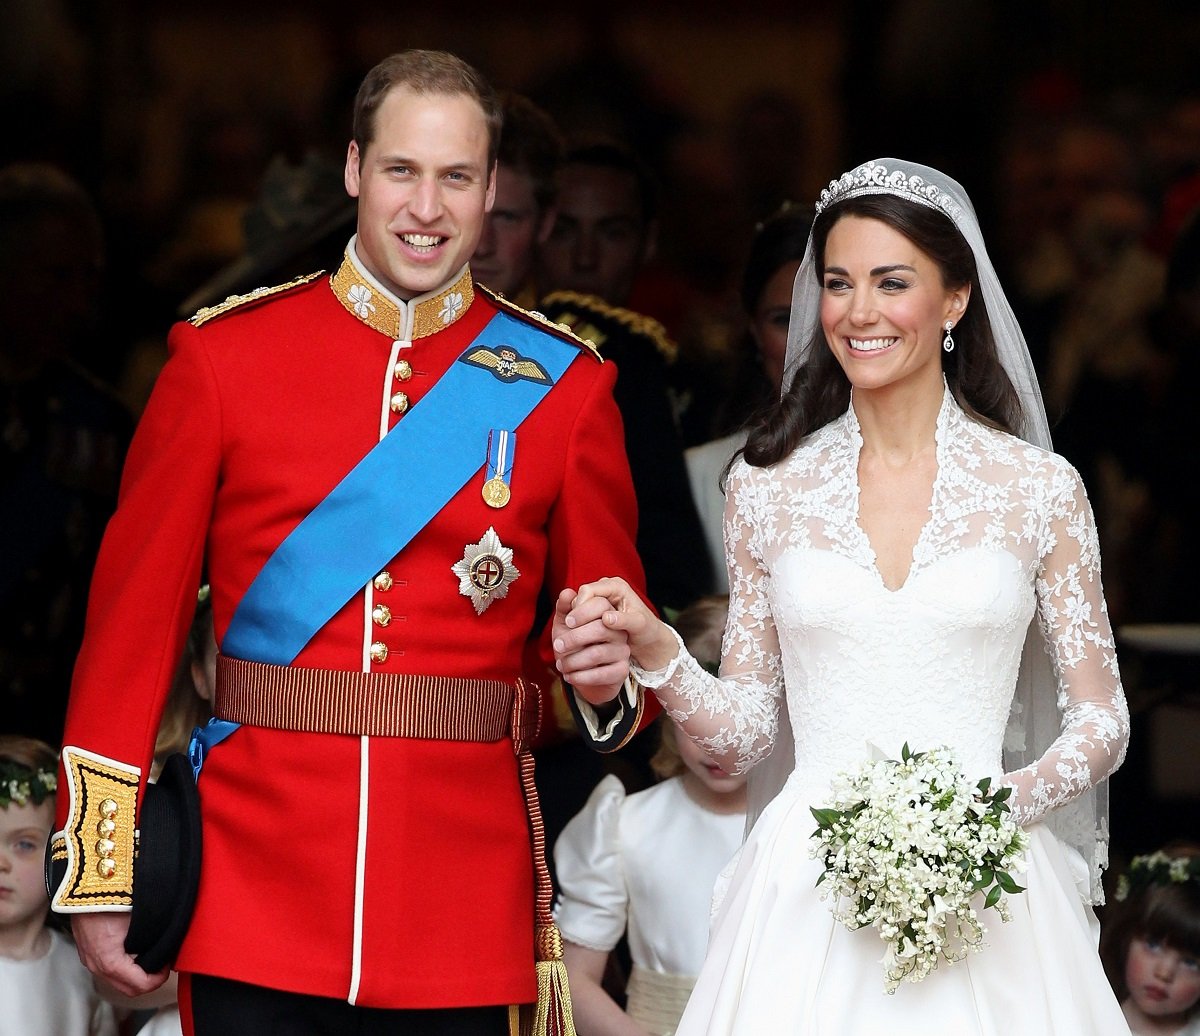 Prince William and Kate Middleton smile as they leave Westminster Abbey after wedding ceremony